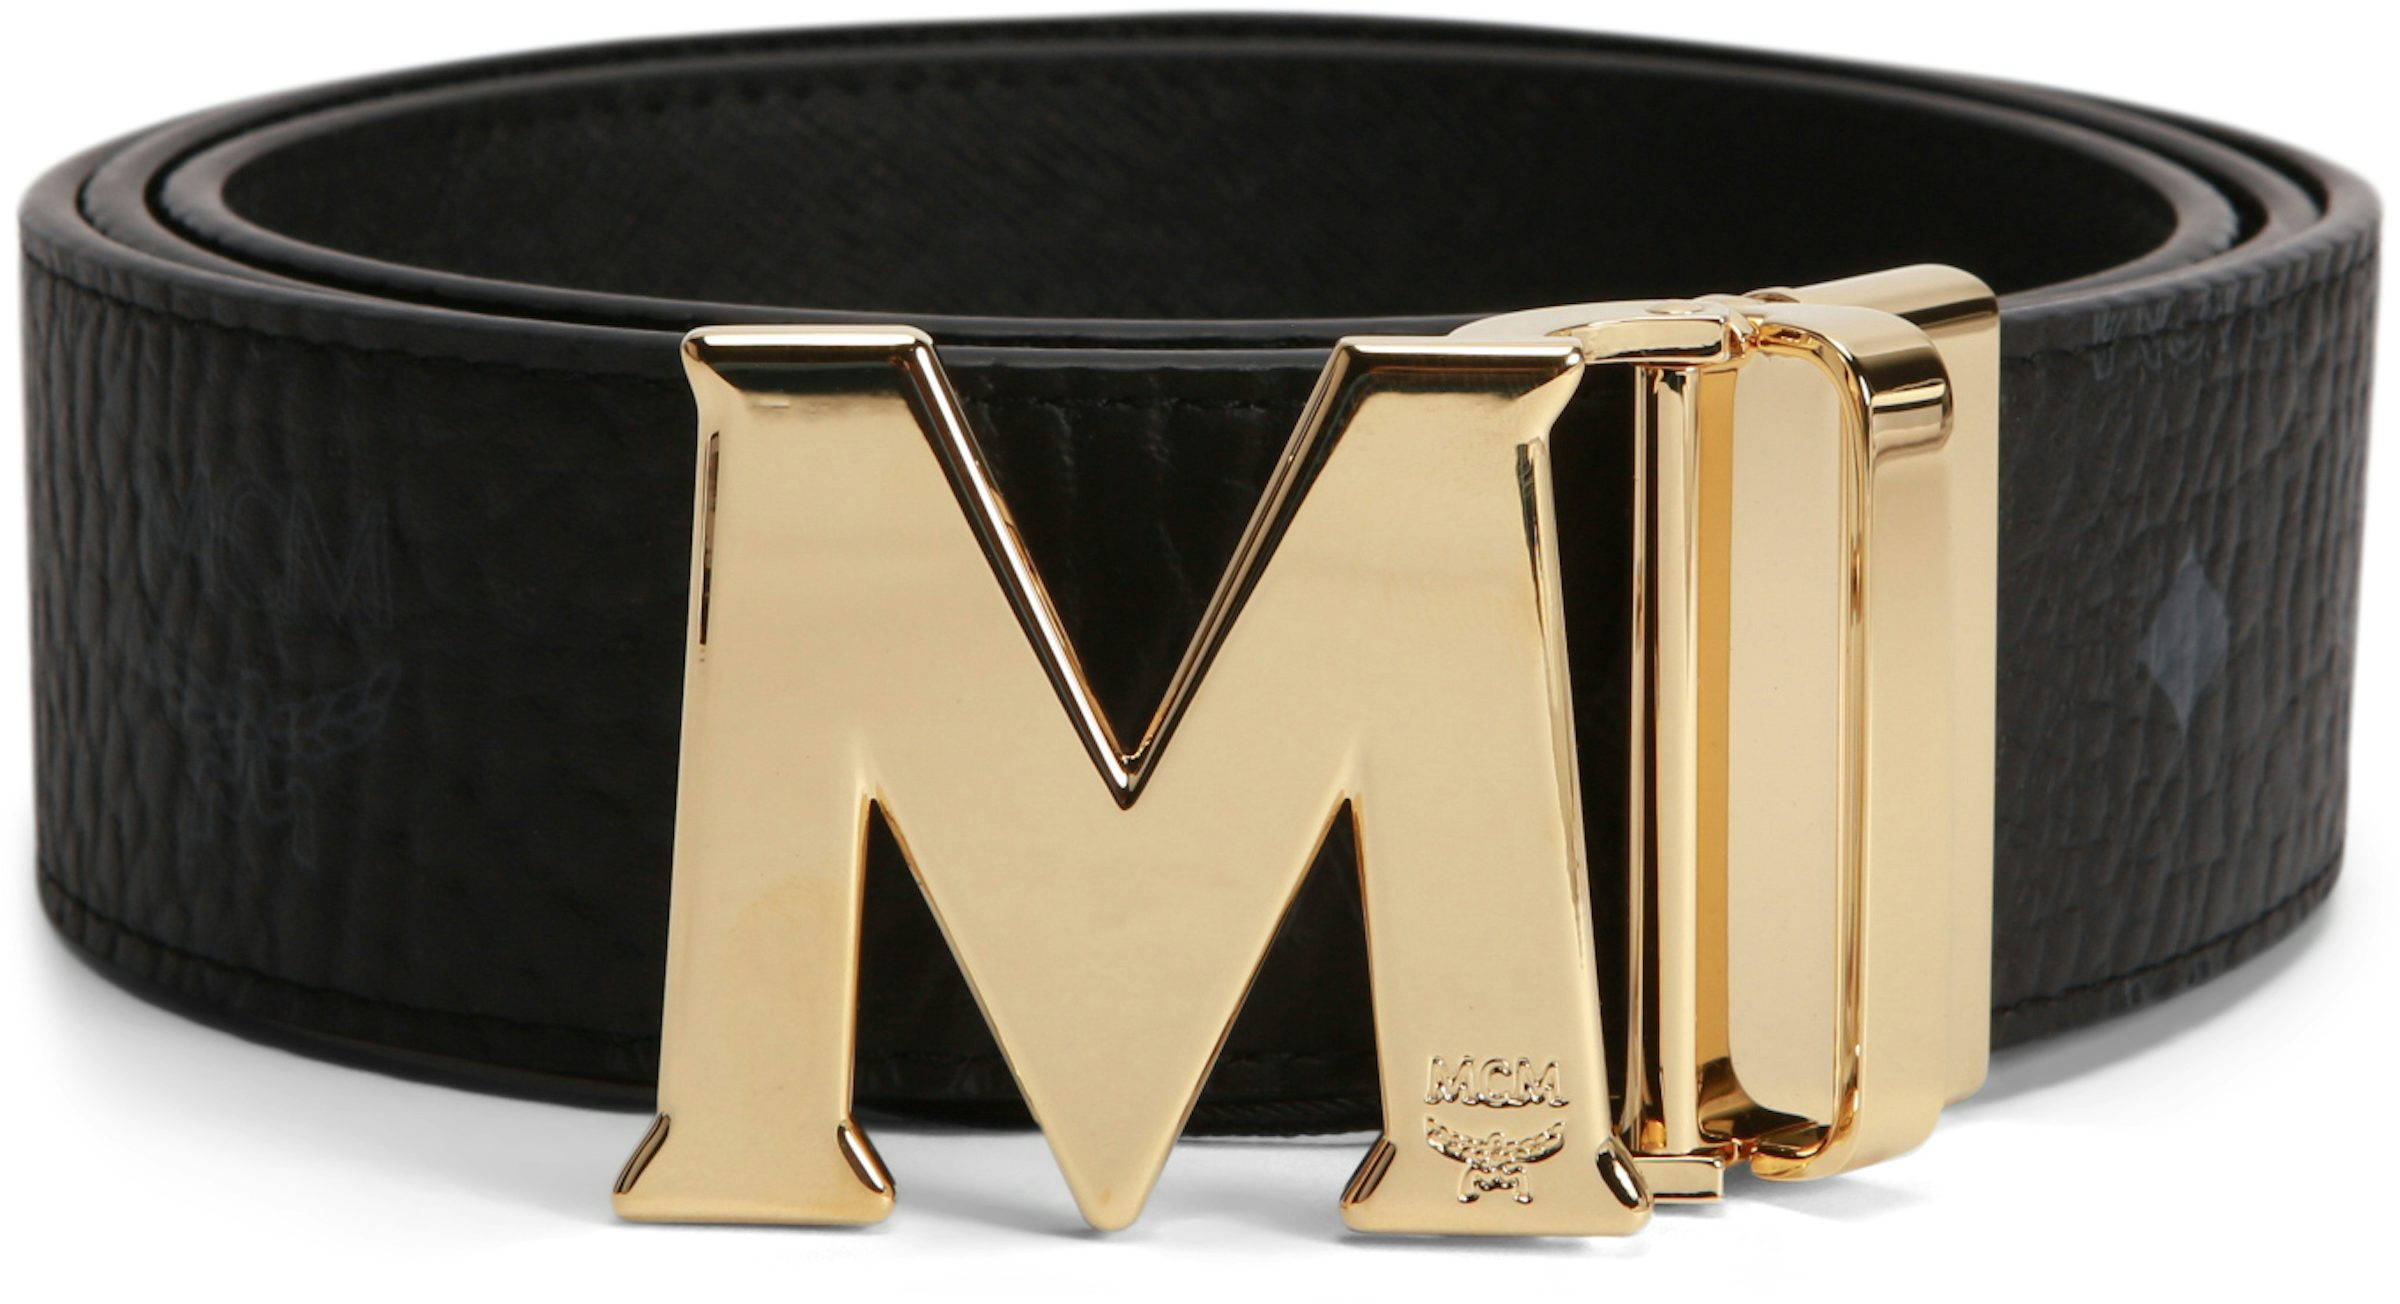 MCM Claus M Reversible Belt Visetos Matte Black-tone 1.75W 51In/130Cm Ruby  Red in Coated Canvas with Matte Black-tone - US